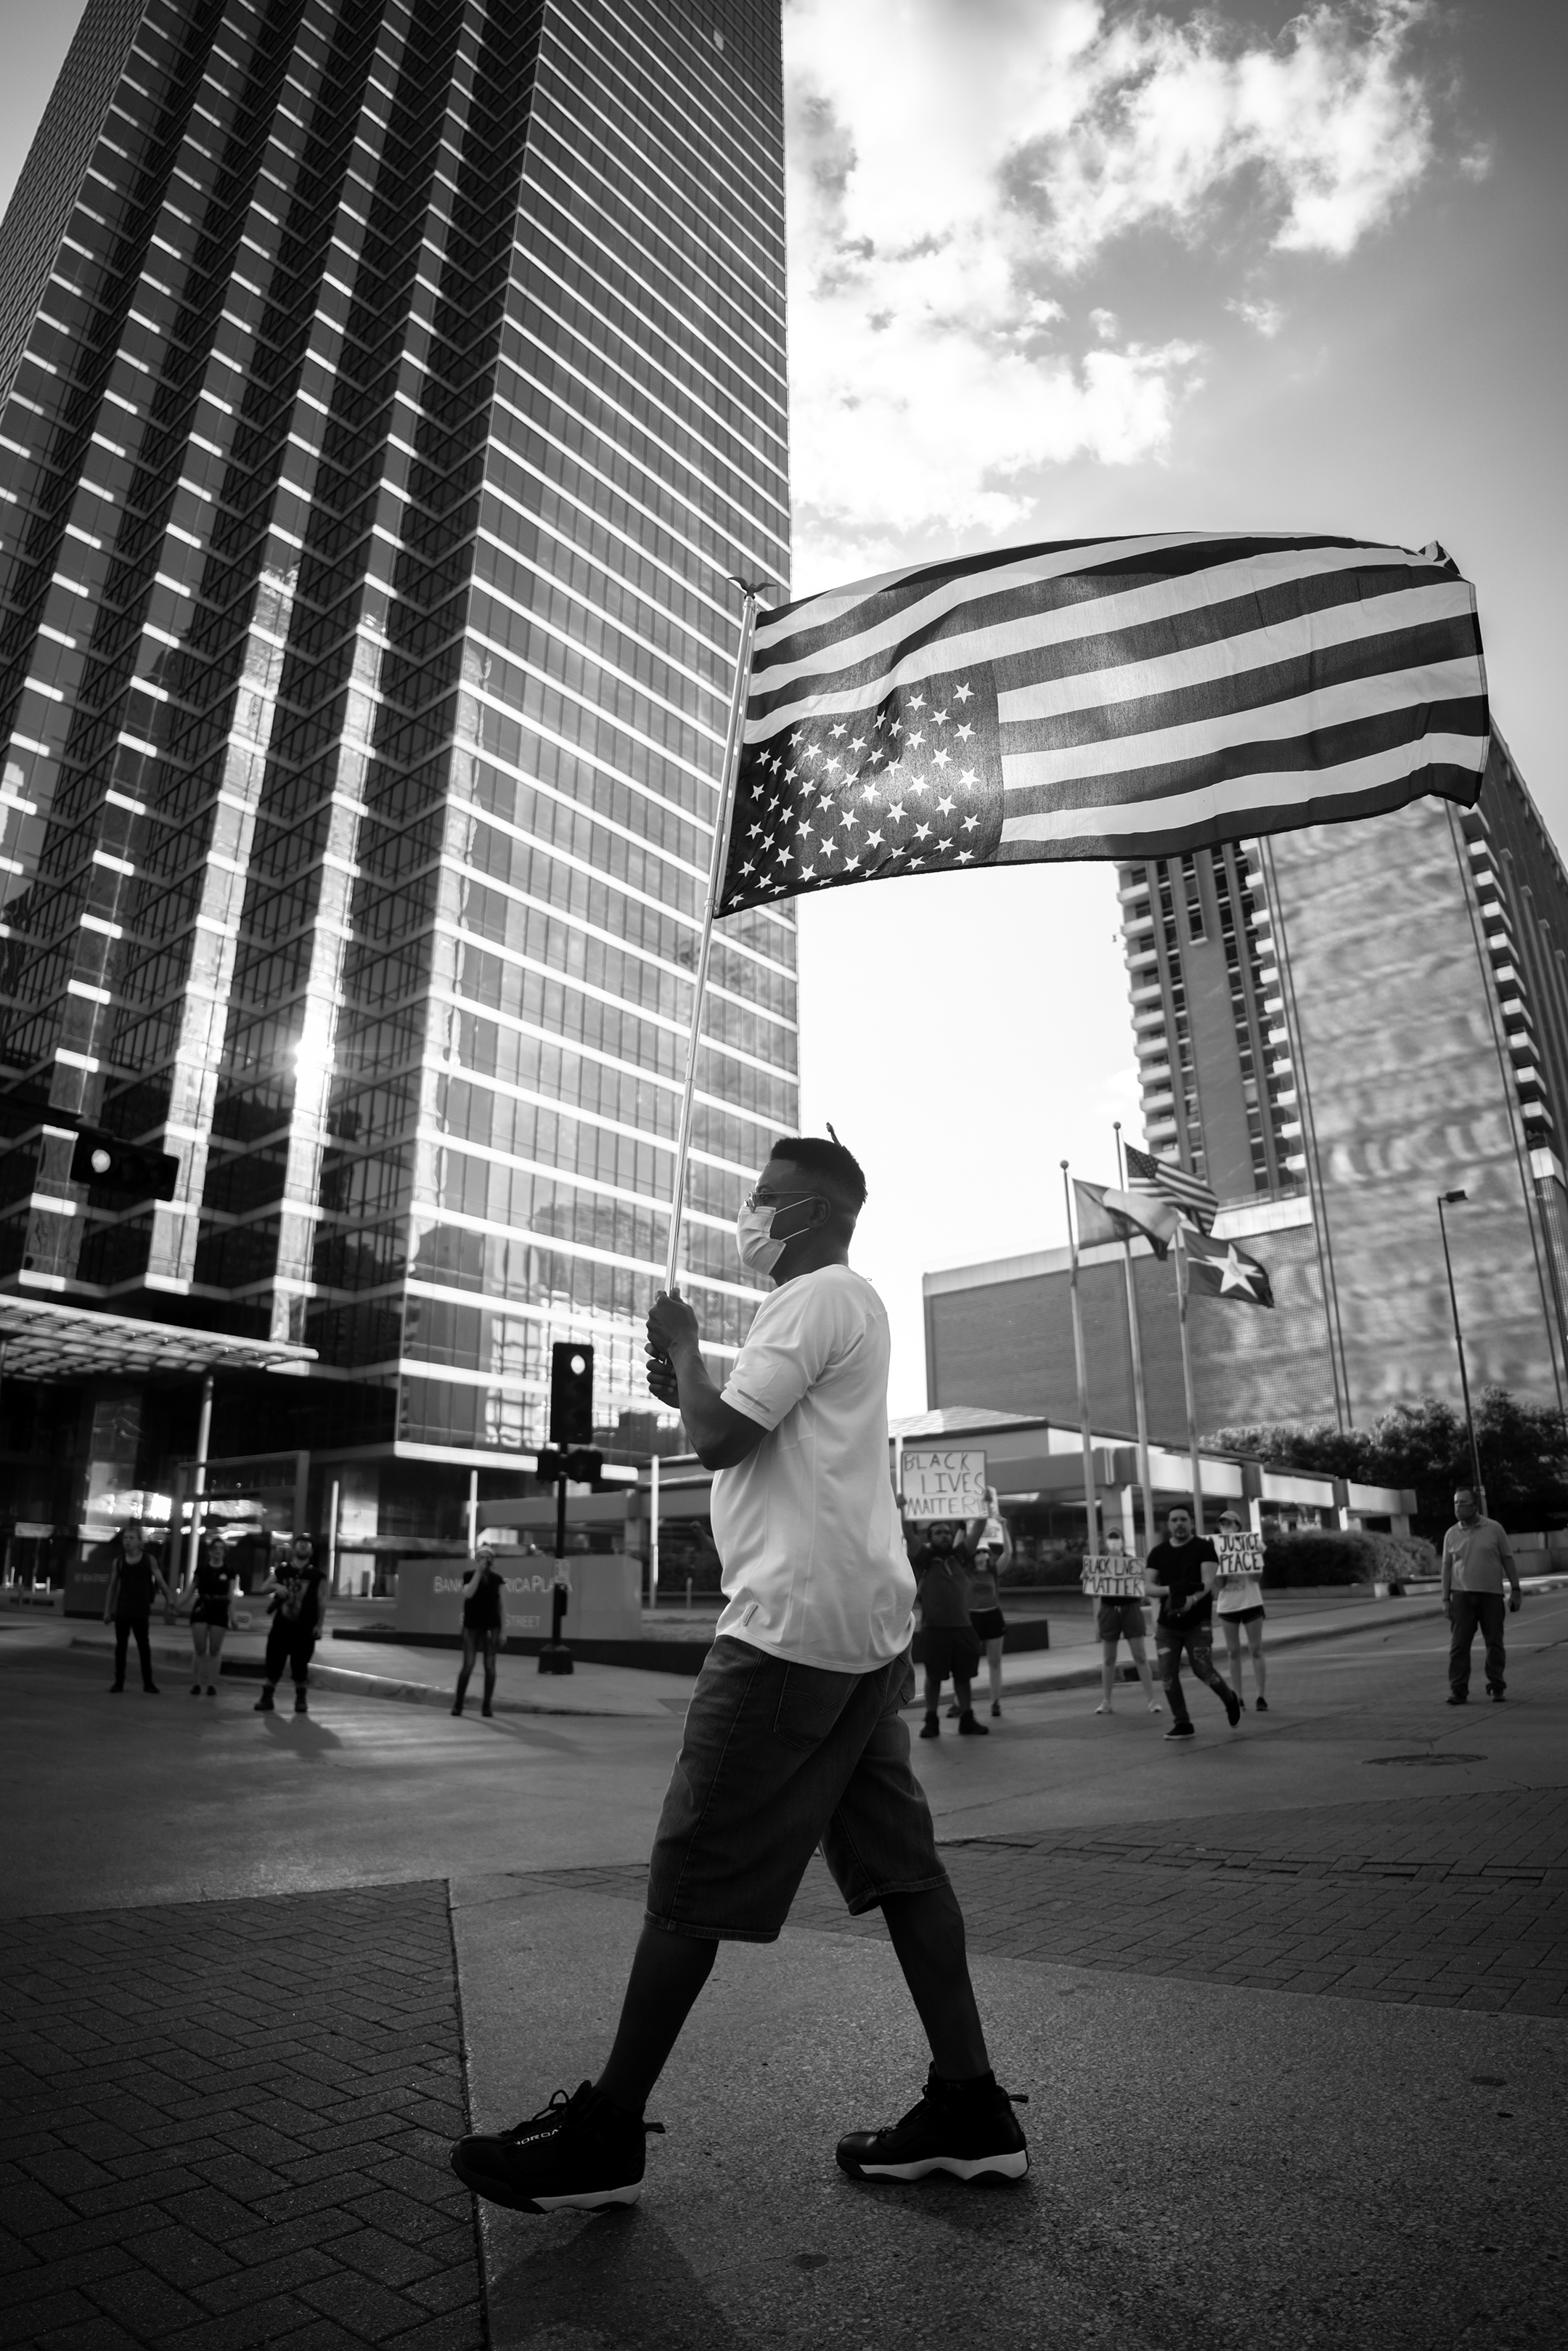 Black and white photo of a black man in a white t-shirt and face mask carrying an upside down American flag